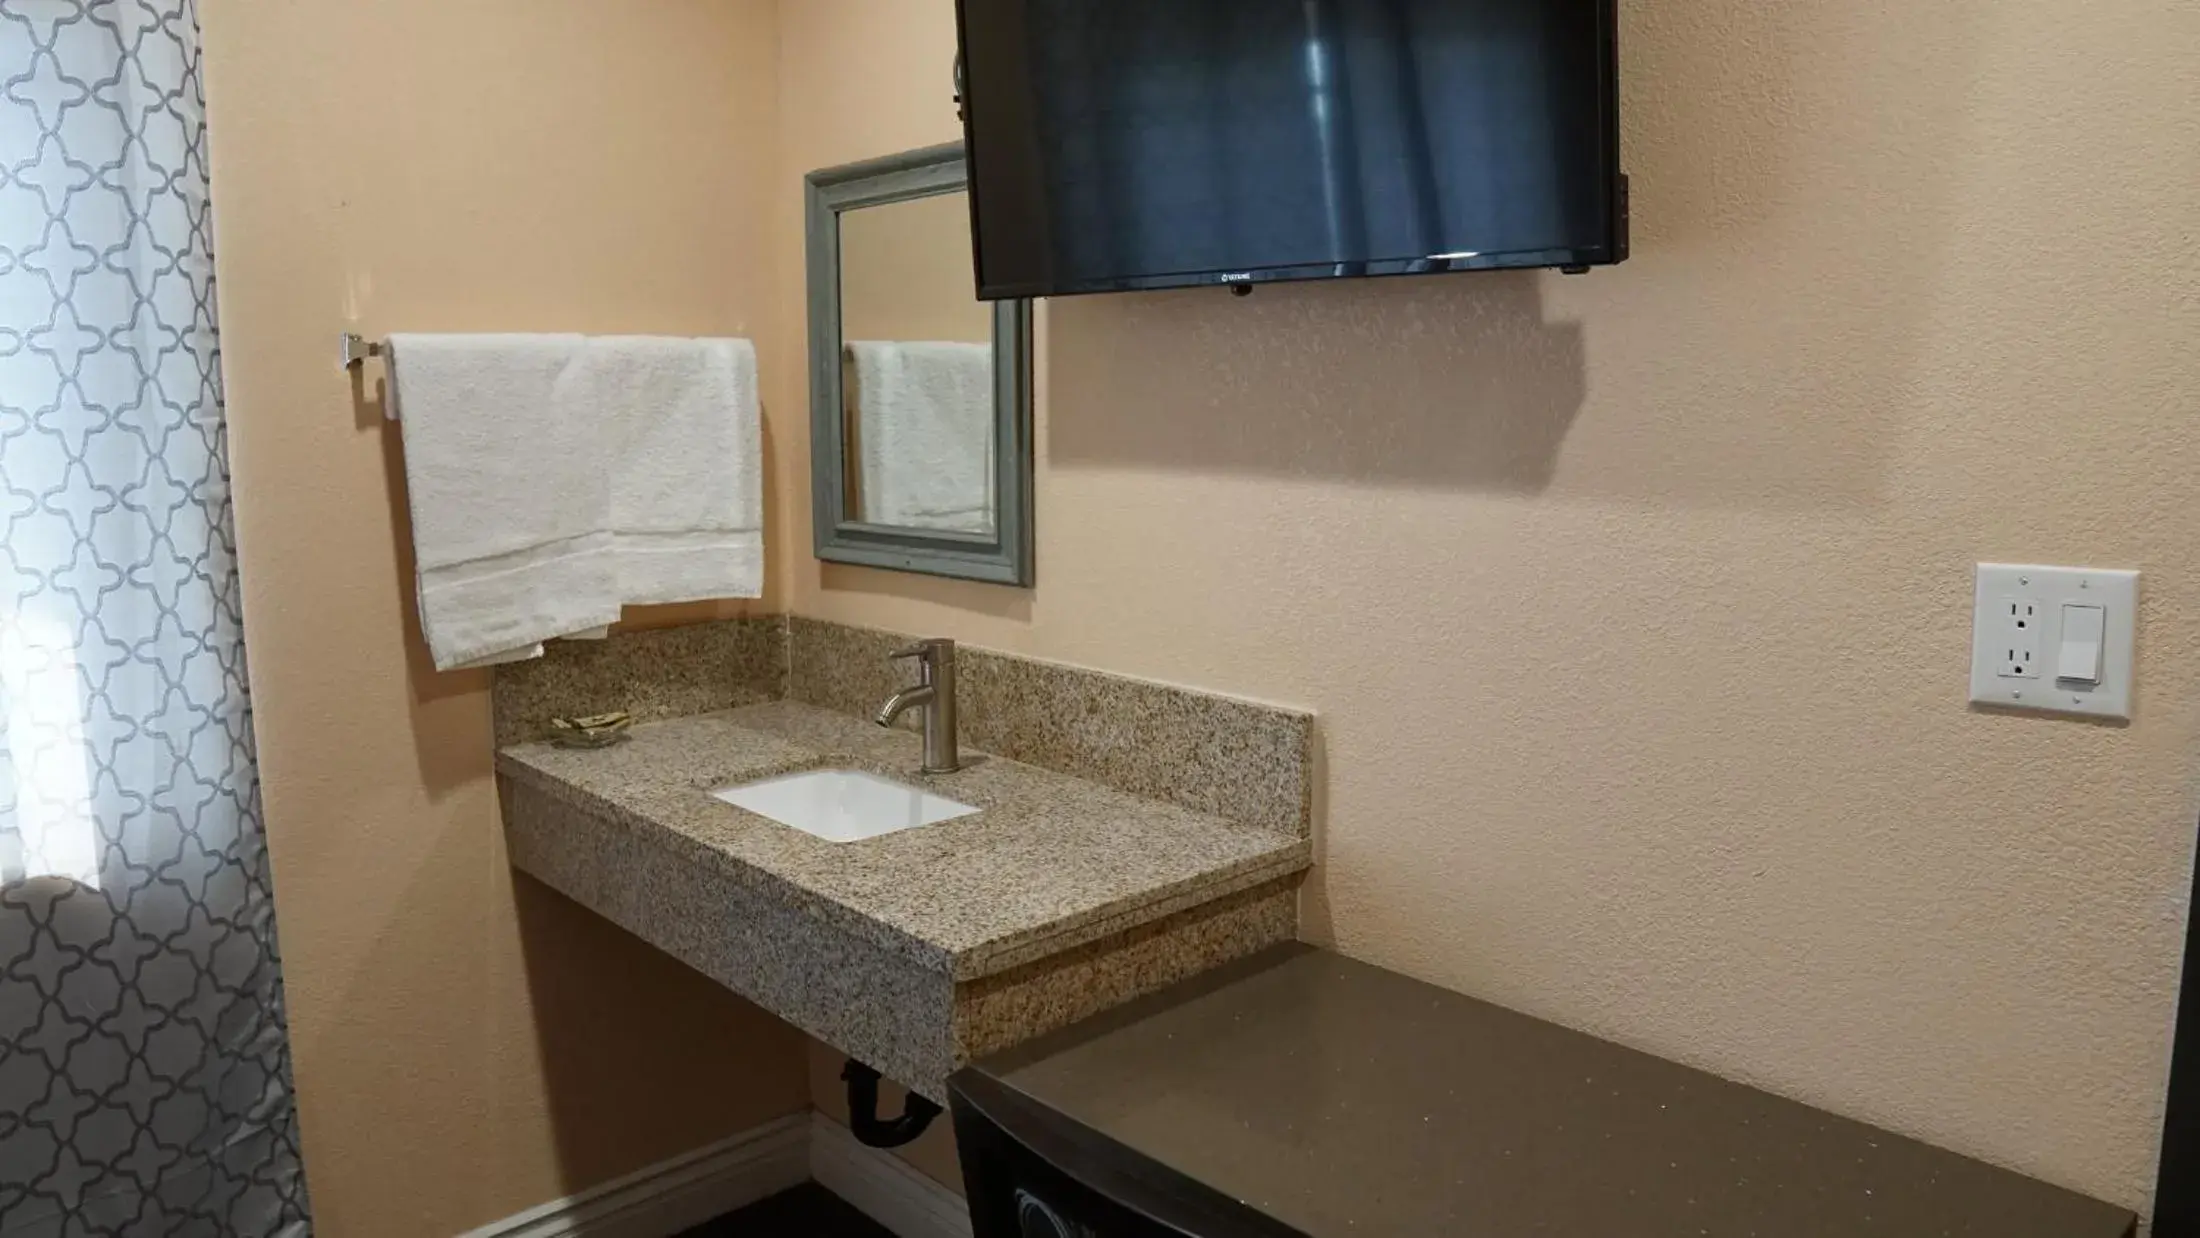 Bathroom in Holly Crest Hotel - Los Angeles, LAX Airport